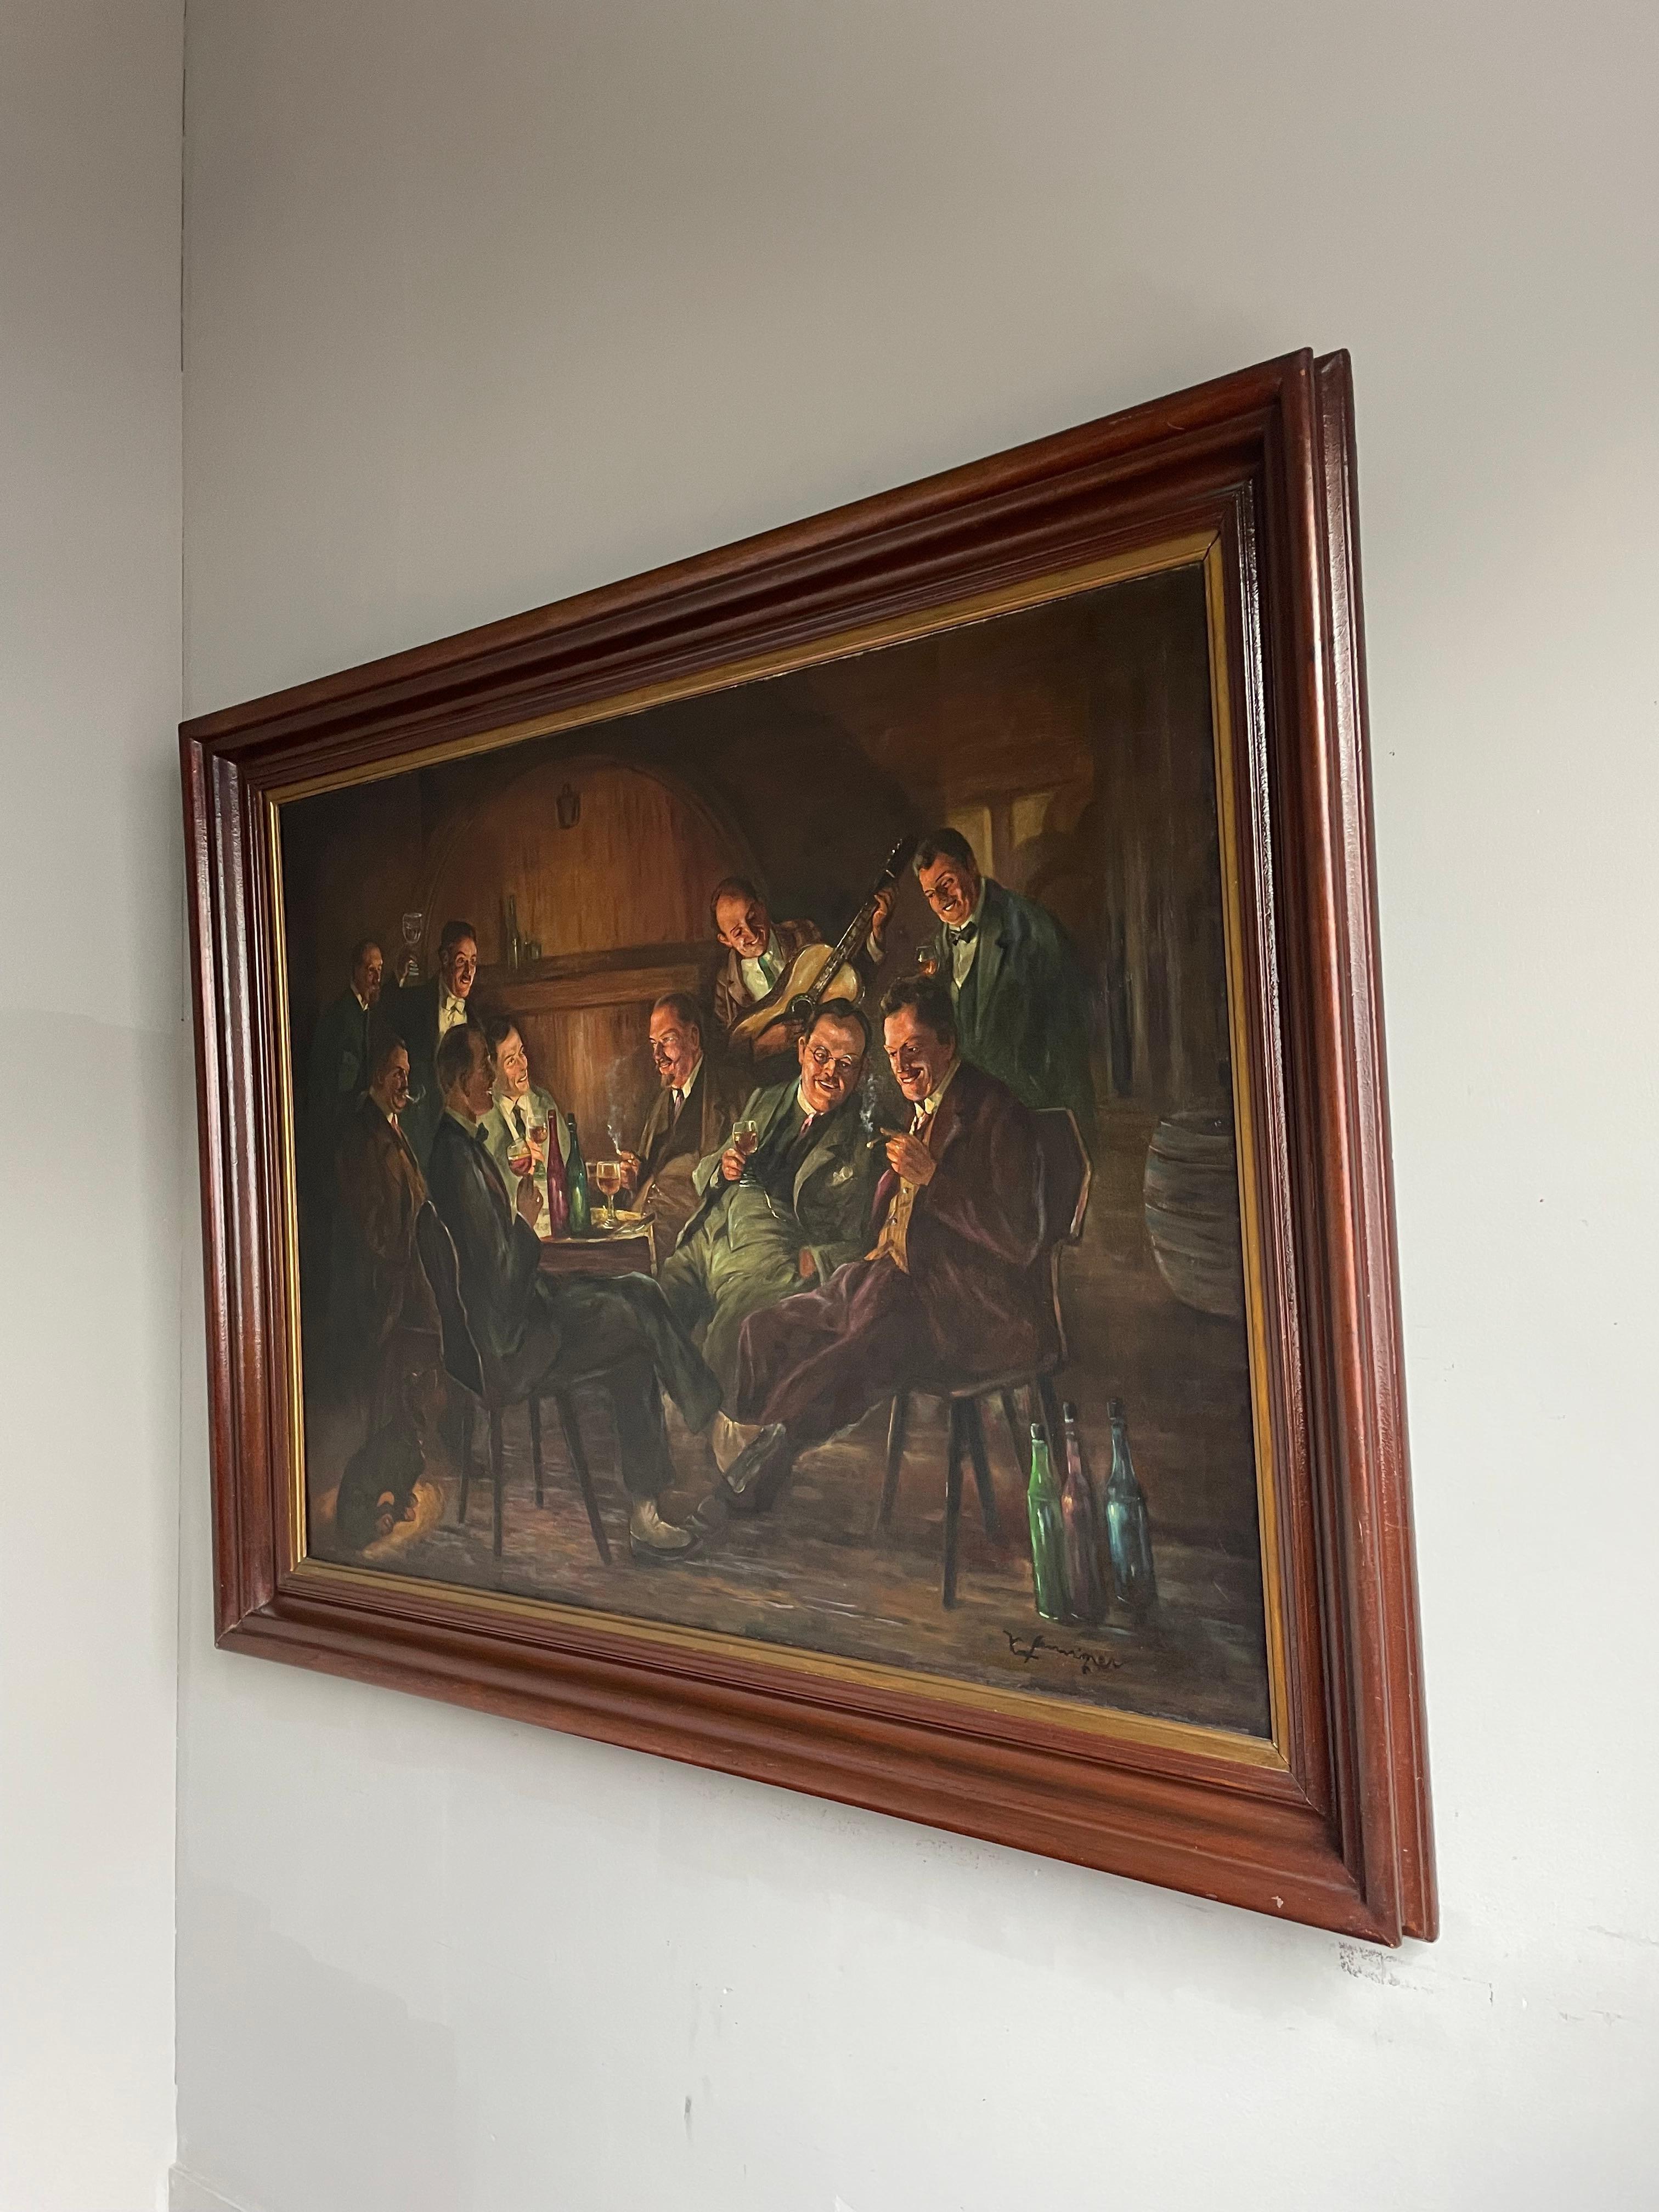 Large size and one of a kind painting with a great atmosphere.

We are by no means connoisseurs when it comes to antique paintings, but we have seen enough antique paintings to know when something is special, decorative and truly joyful and